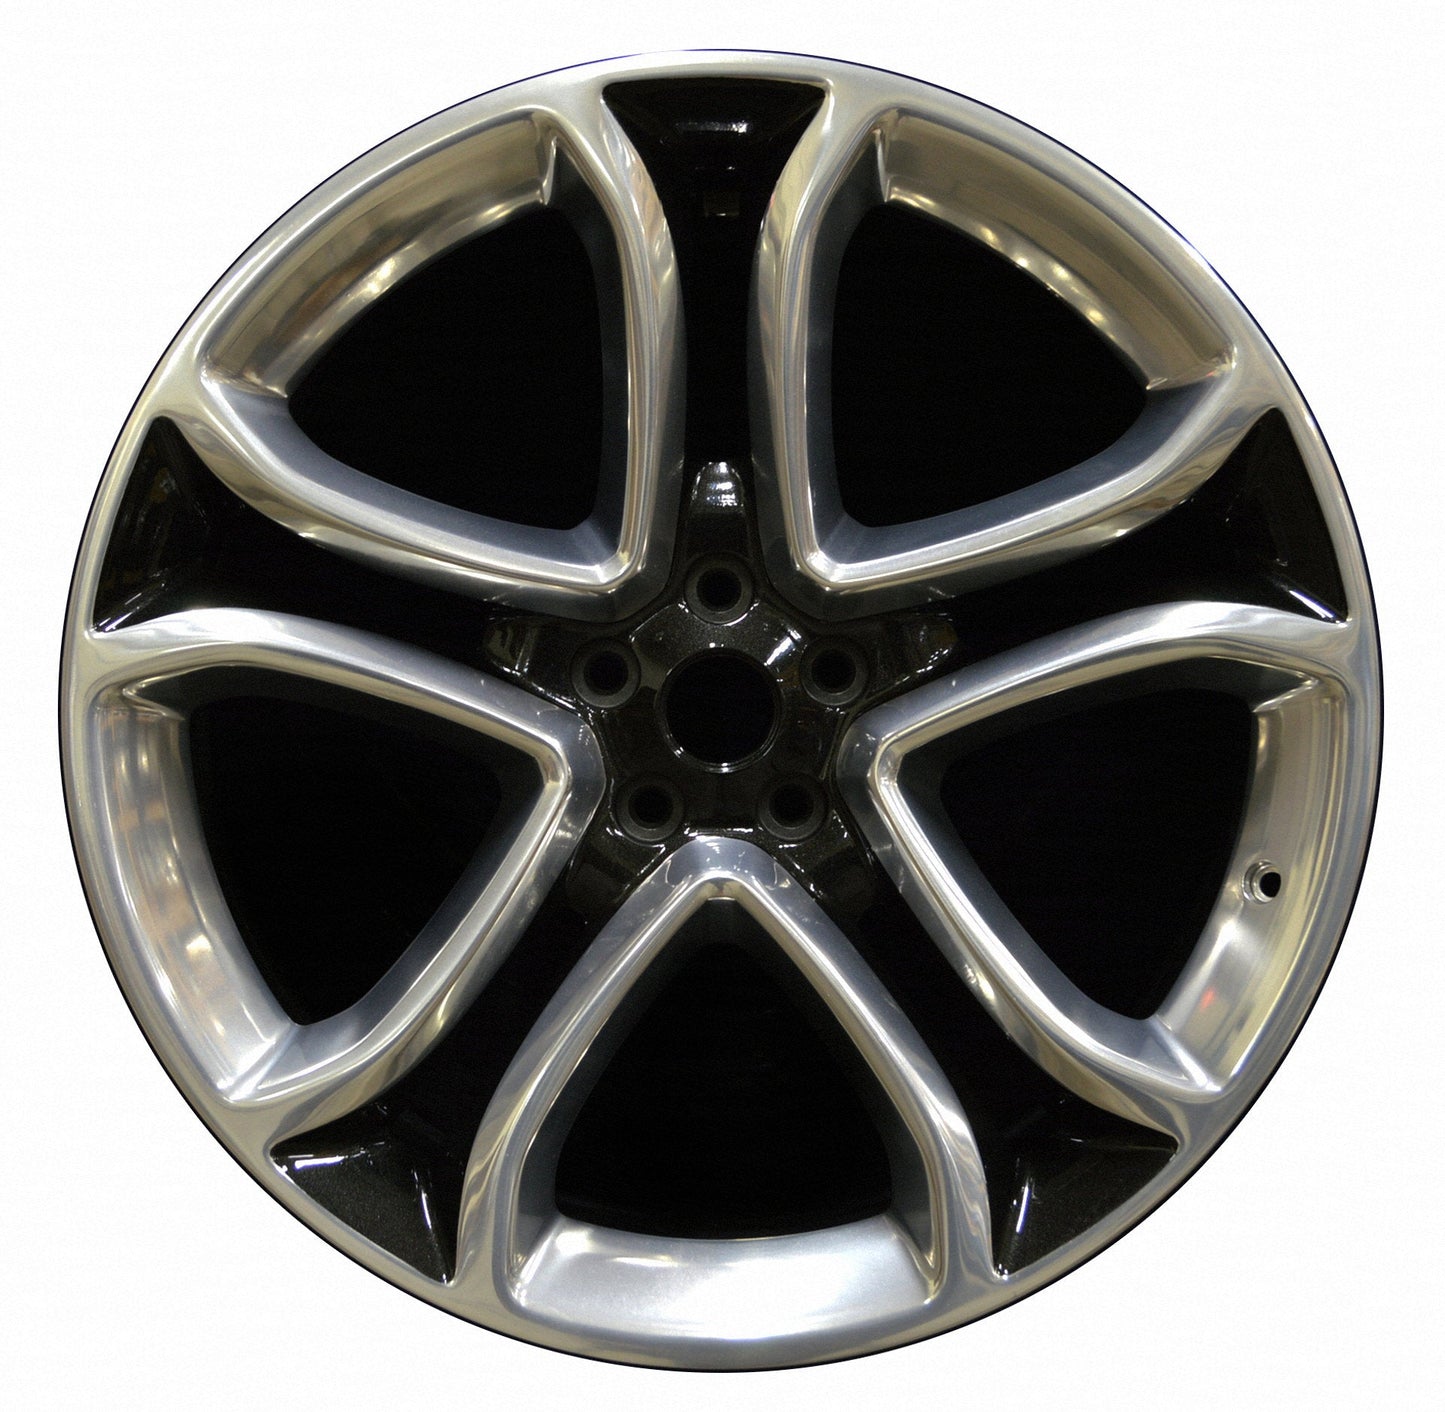 Lincoln MKX  2013, 2014, 2015 Factory OEM Car Wheel Size 22x9 Alloy WAO.3850A.LB02.POL